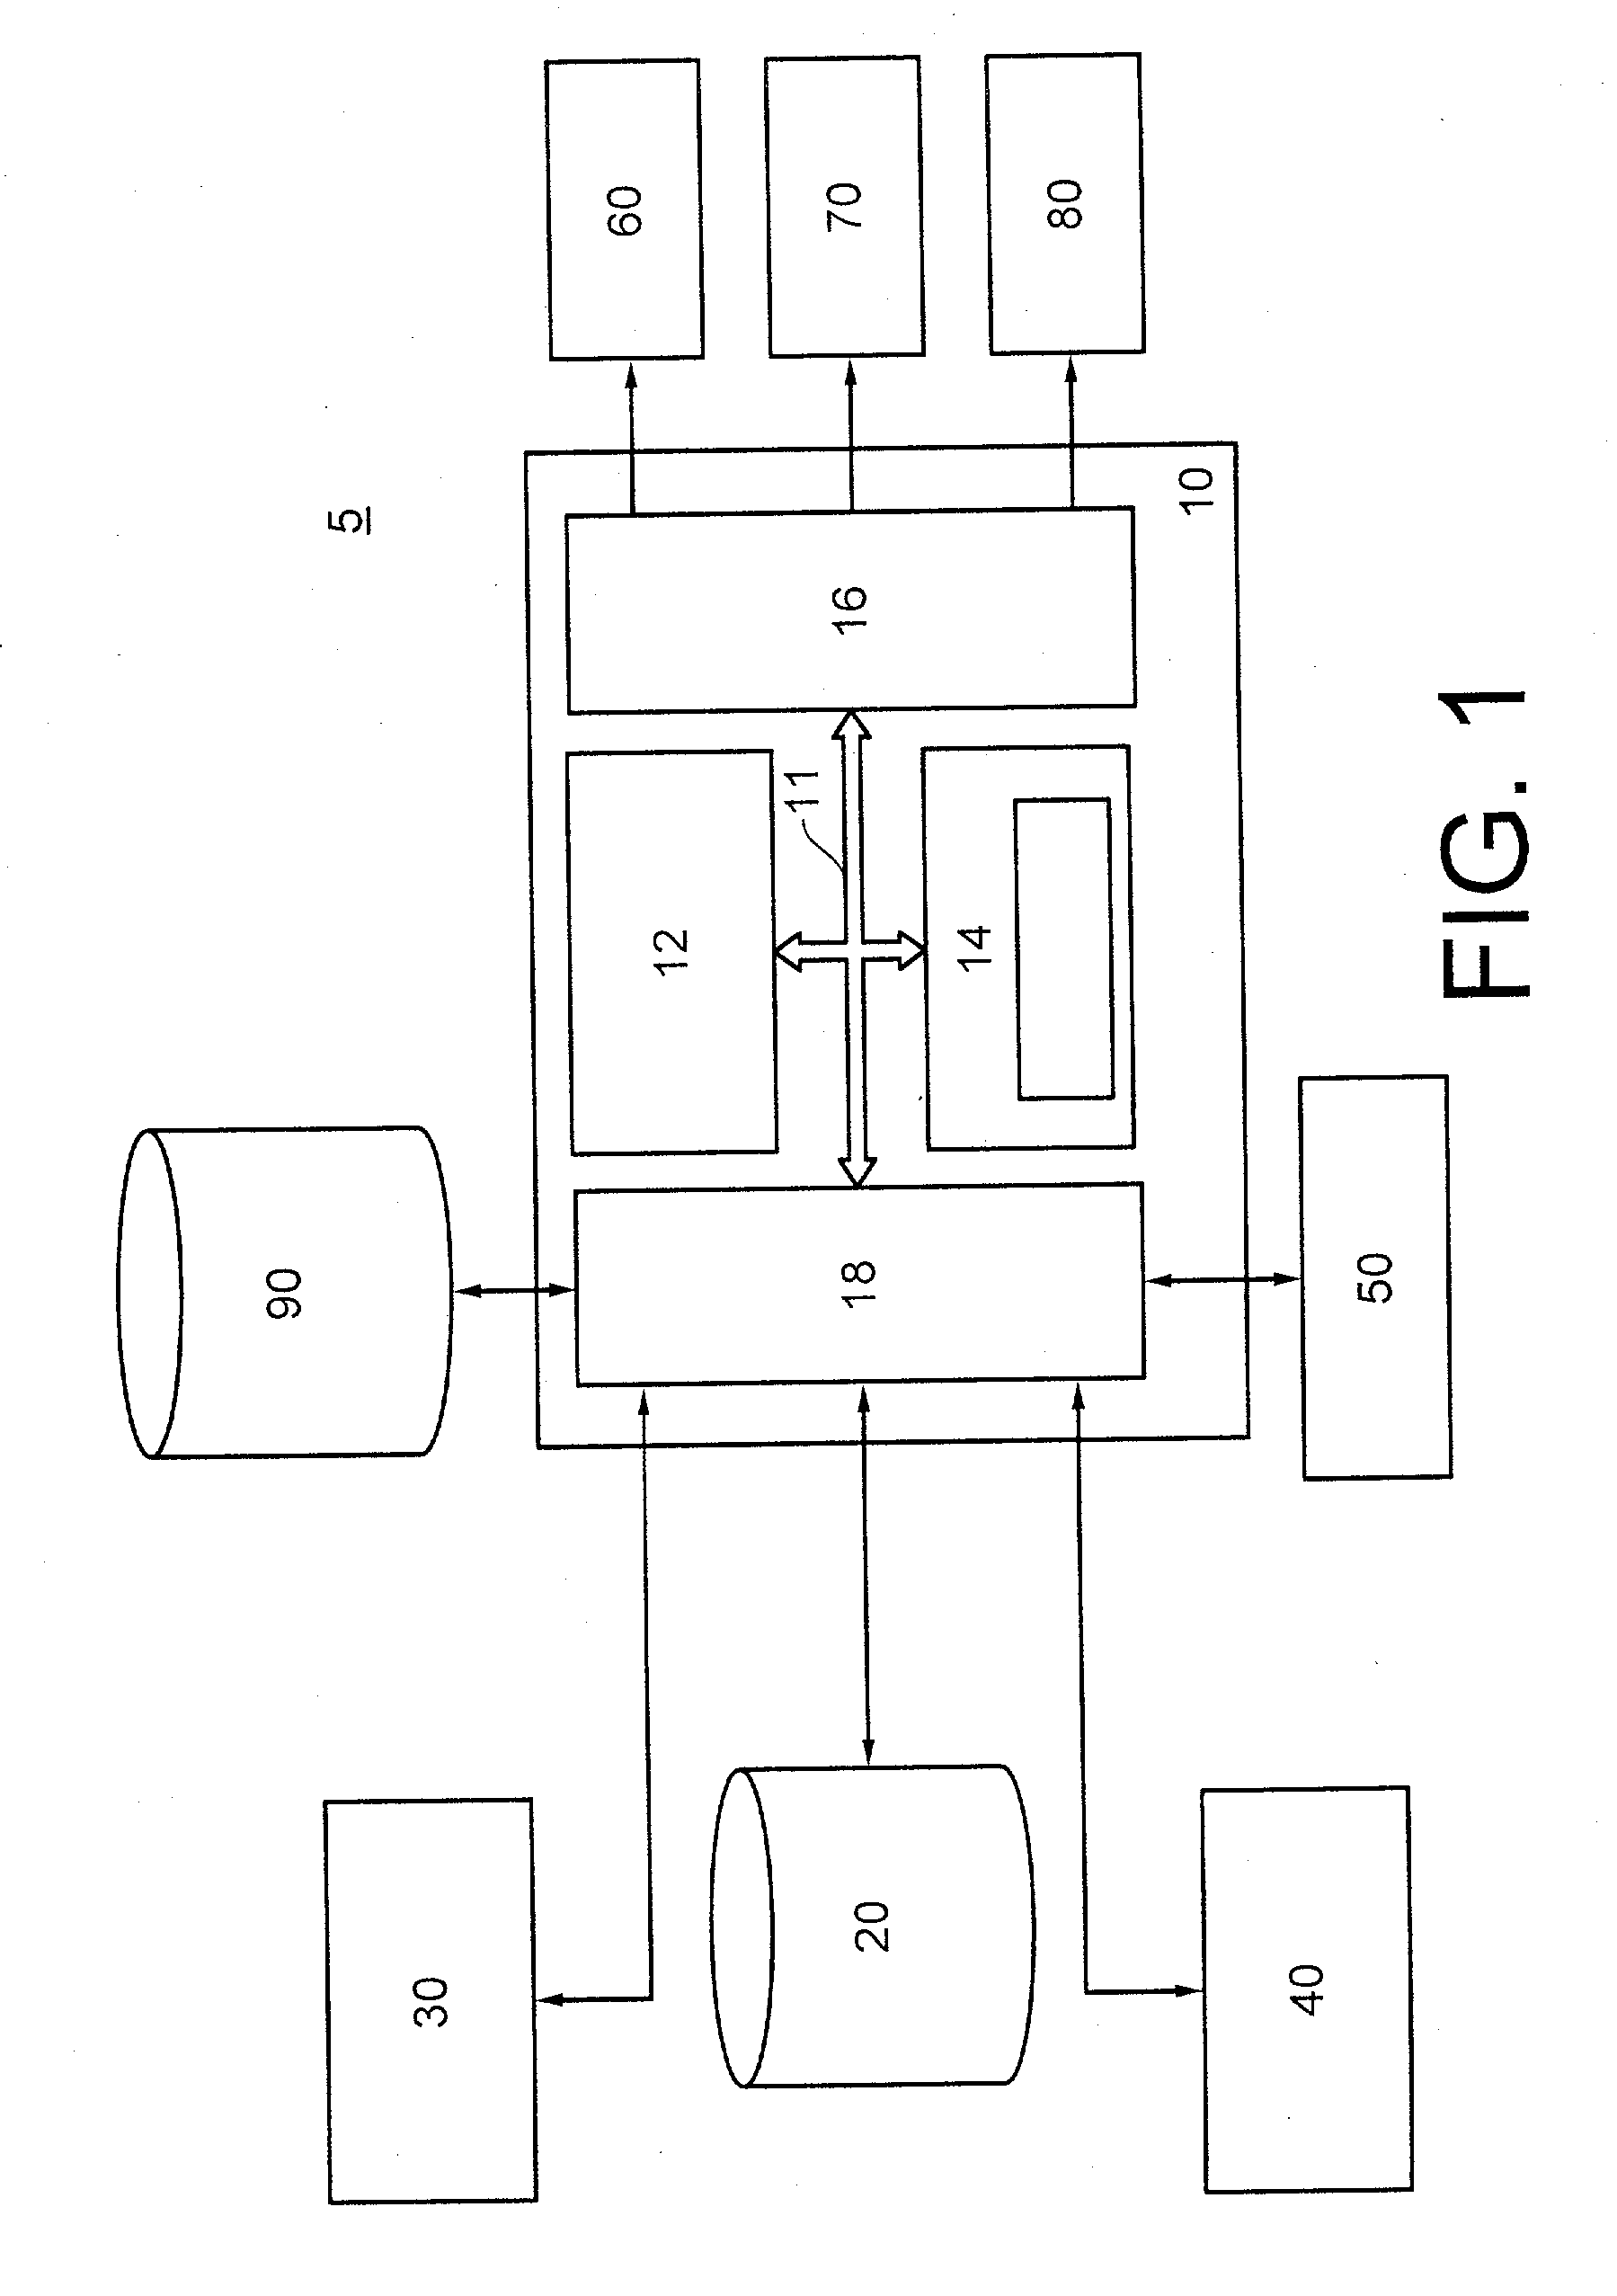 Method for automatic retrieval of similar patterns in image databases